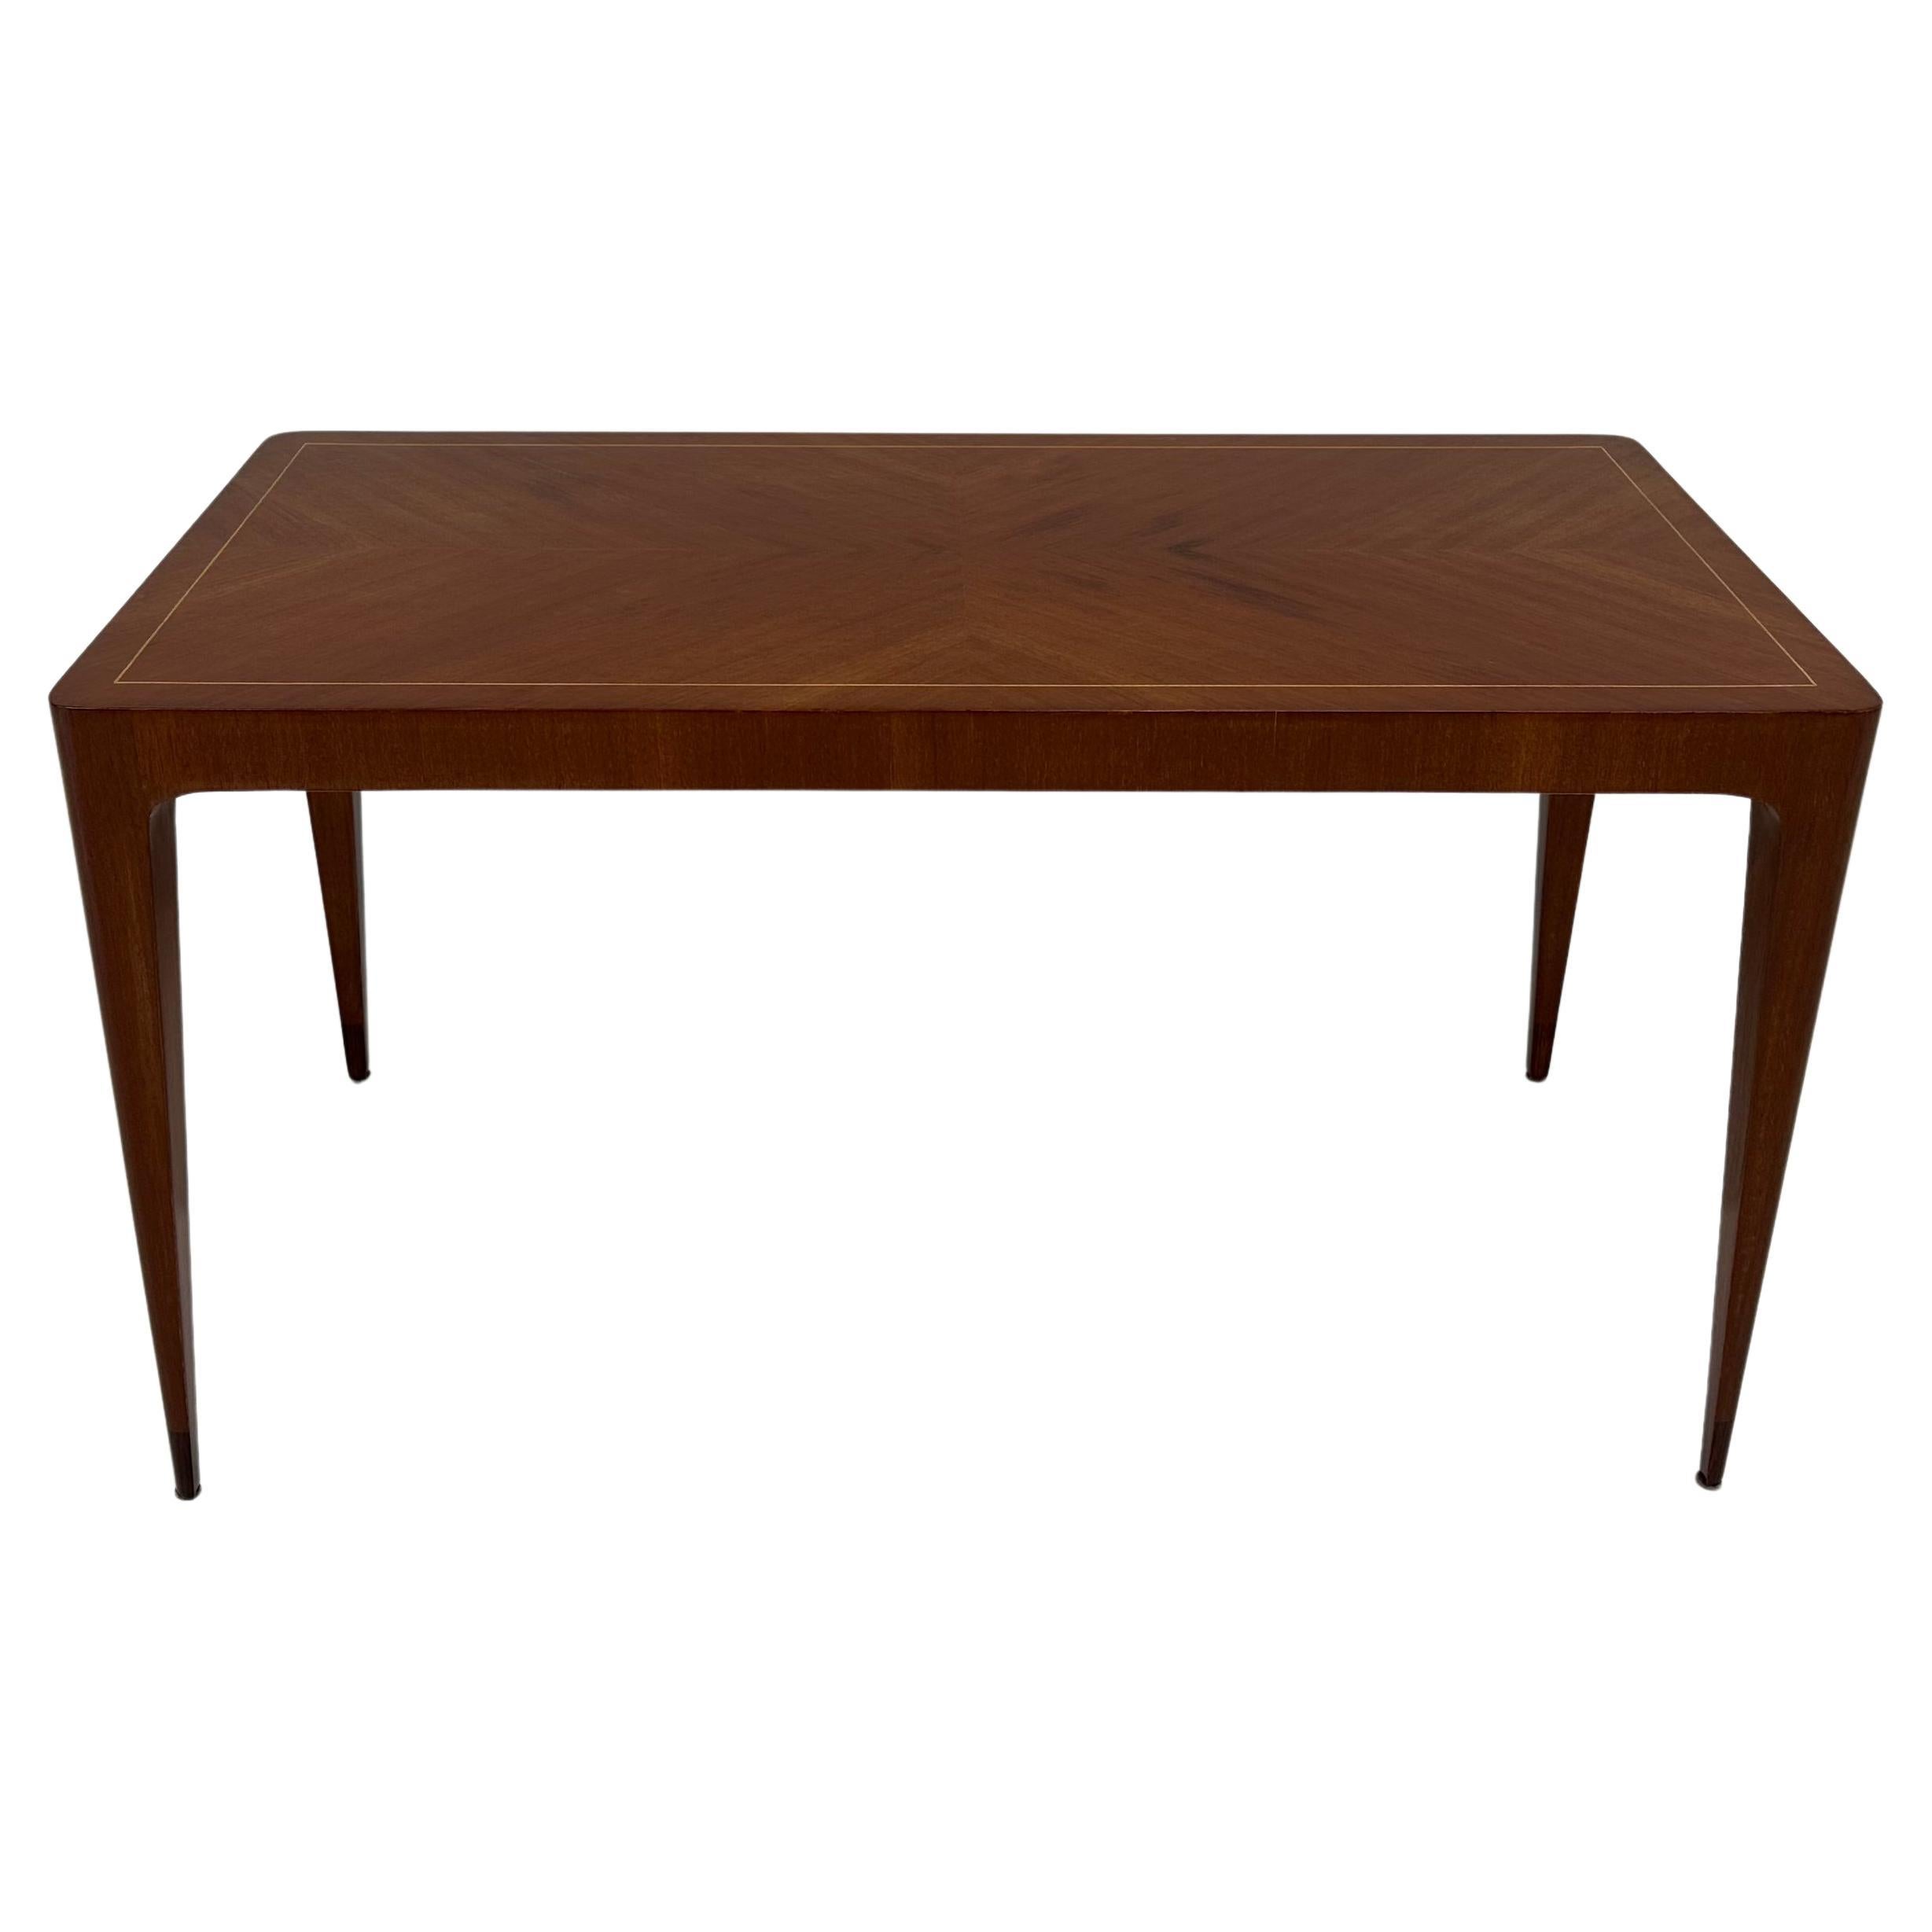 Italian Art Deco Teak and Maple Coffee Table By Paolo Buffa , 1950s For Sale